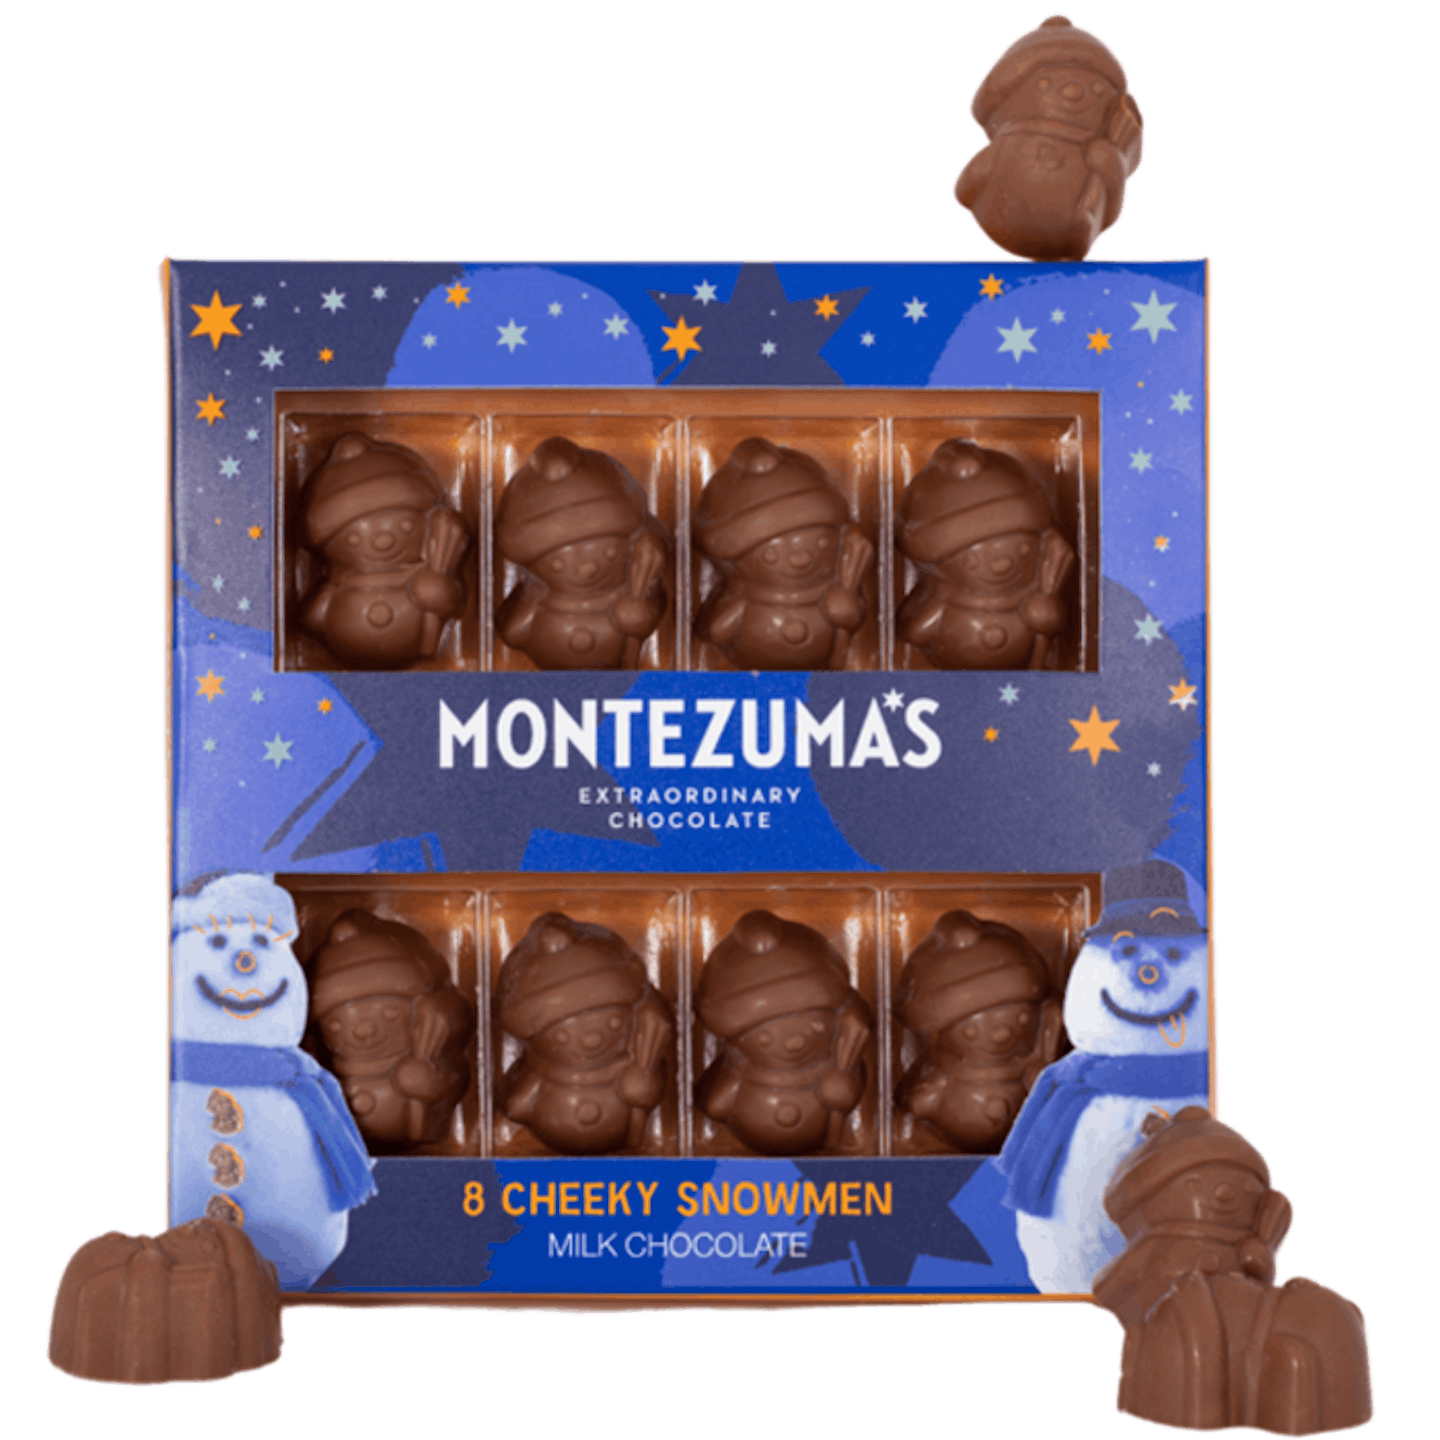 Montezuma's chocolate - Christmas gifts for a family